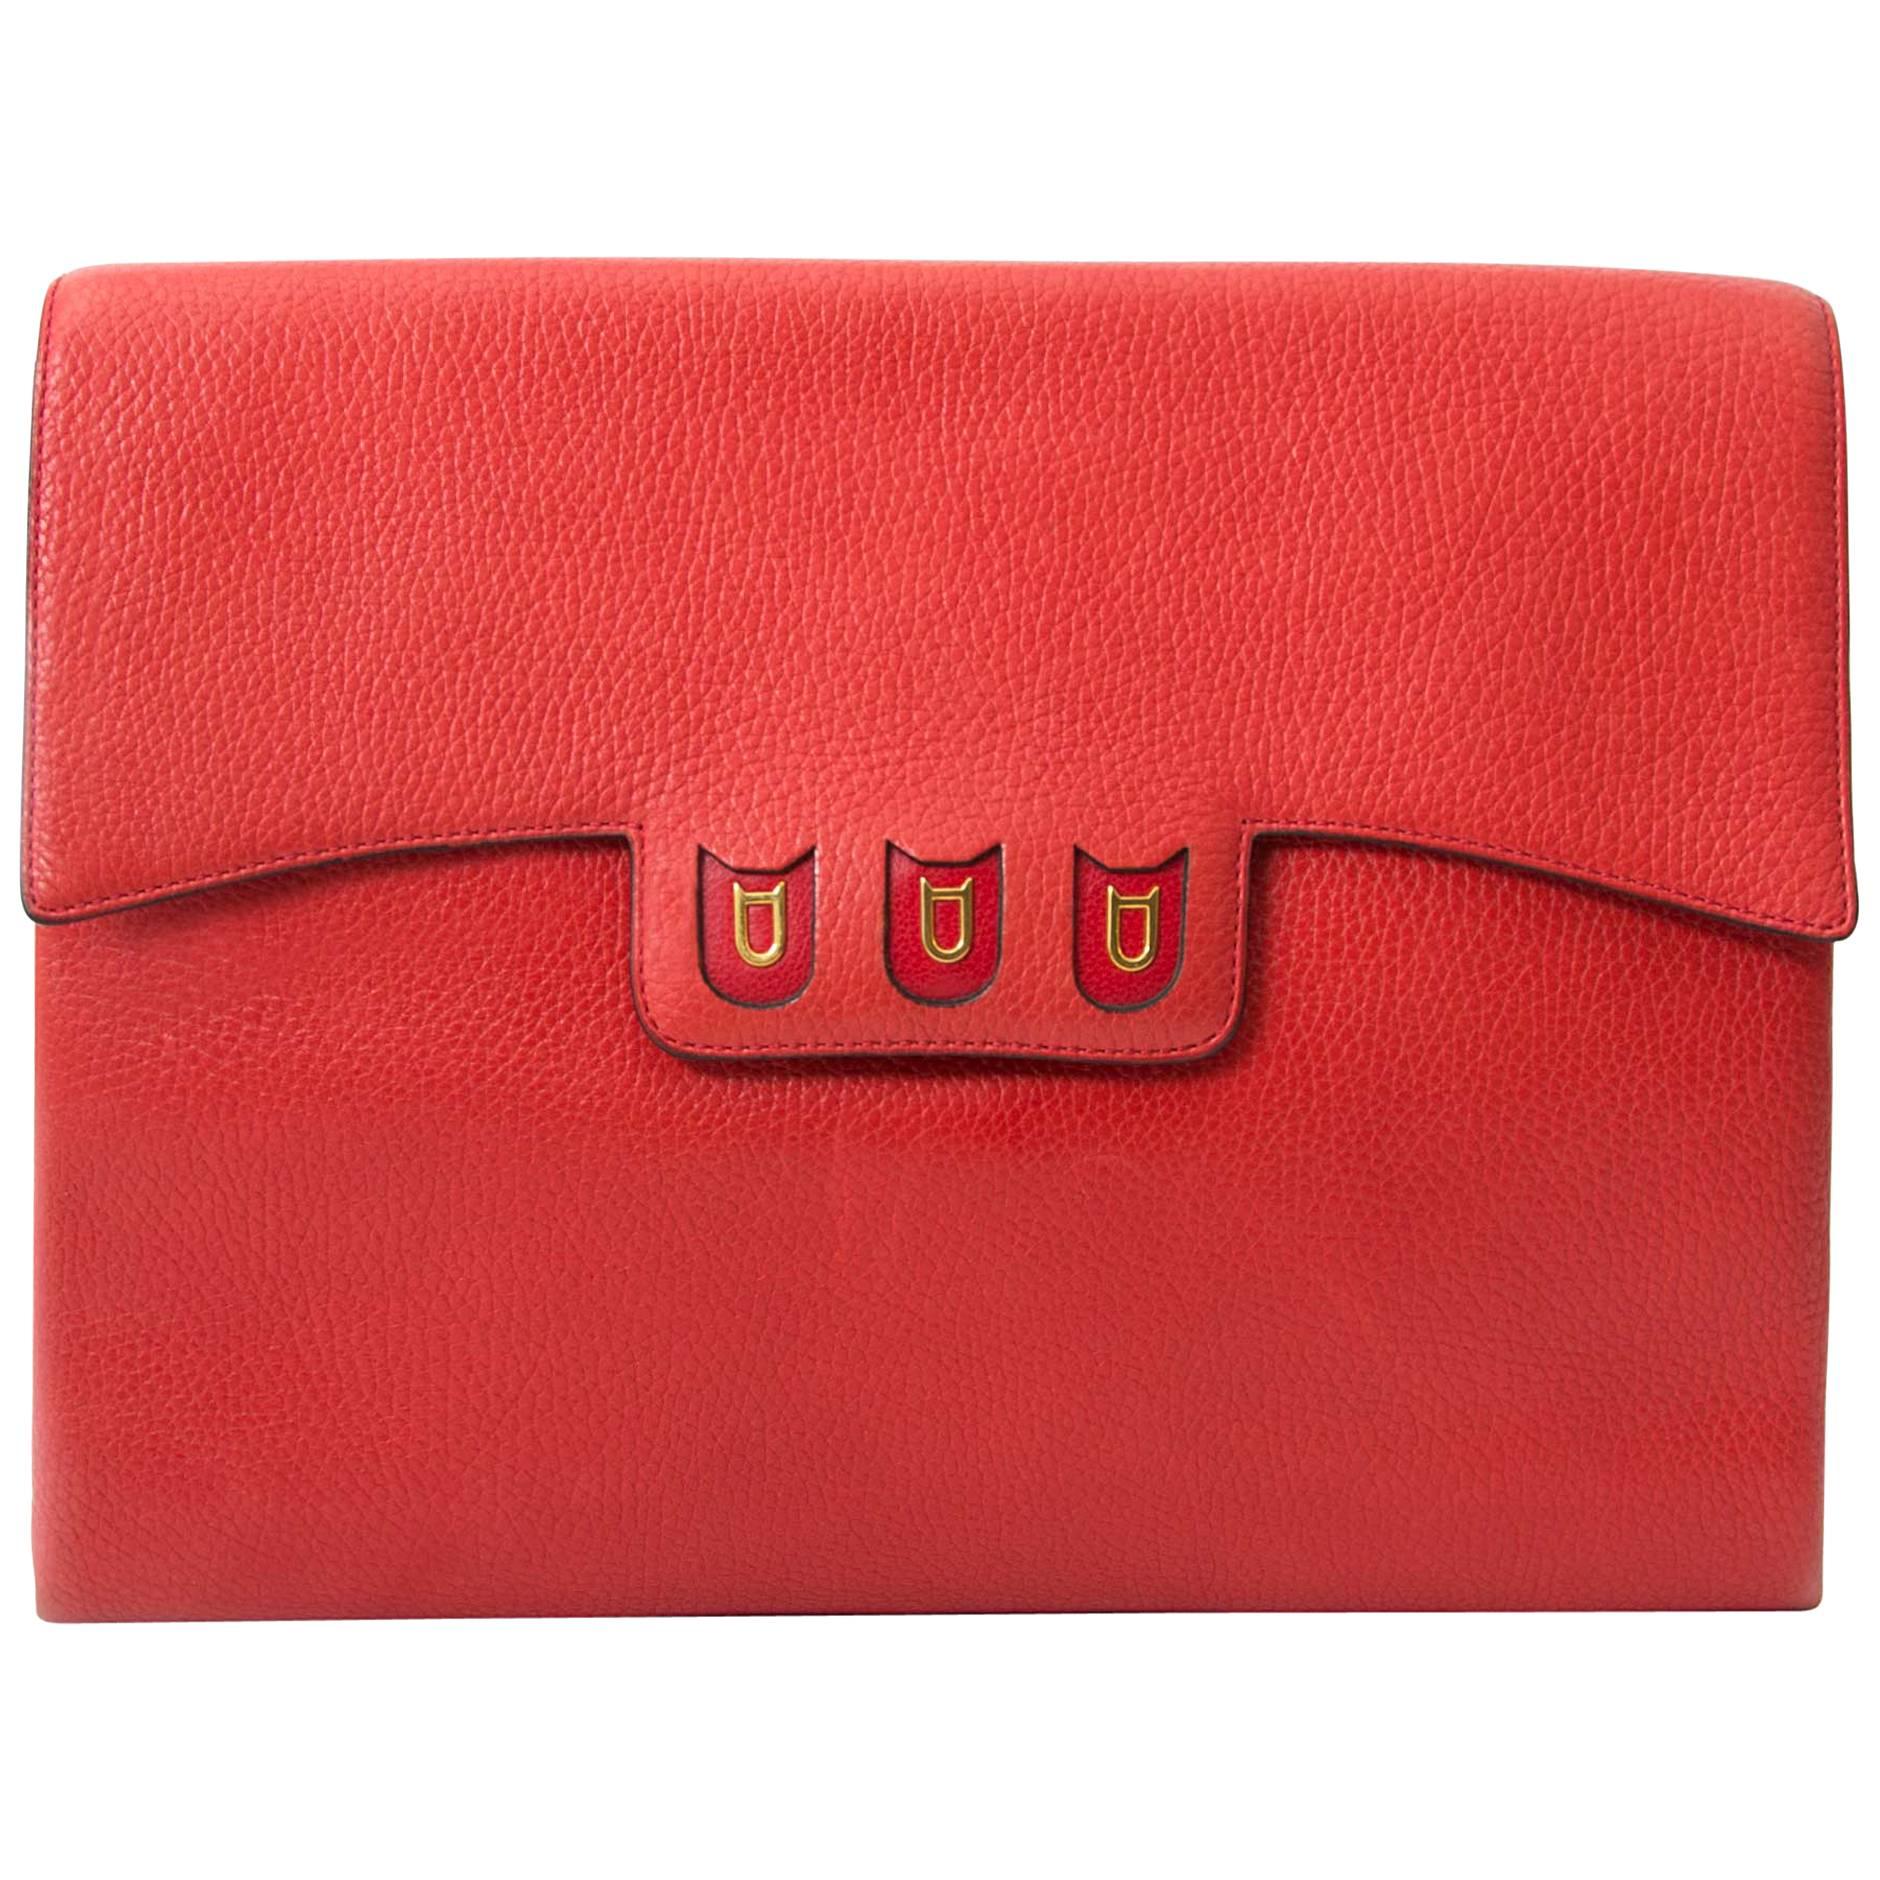  Delvaux Coral Red Briefcase Clutch